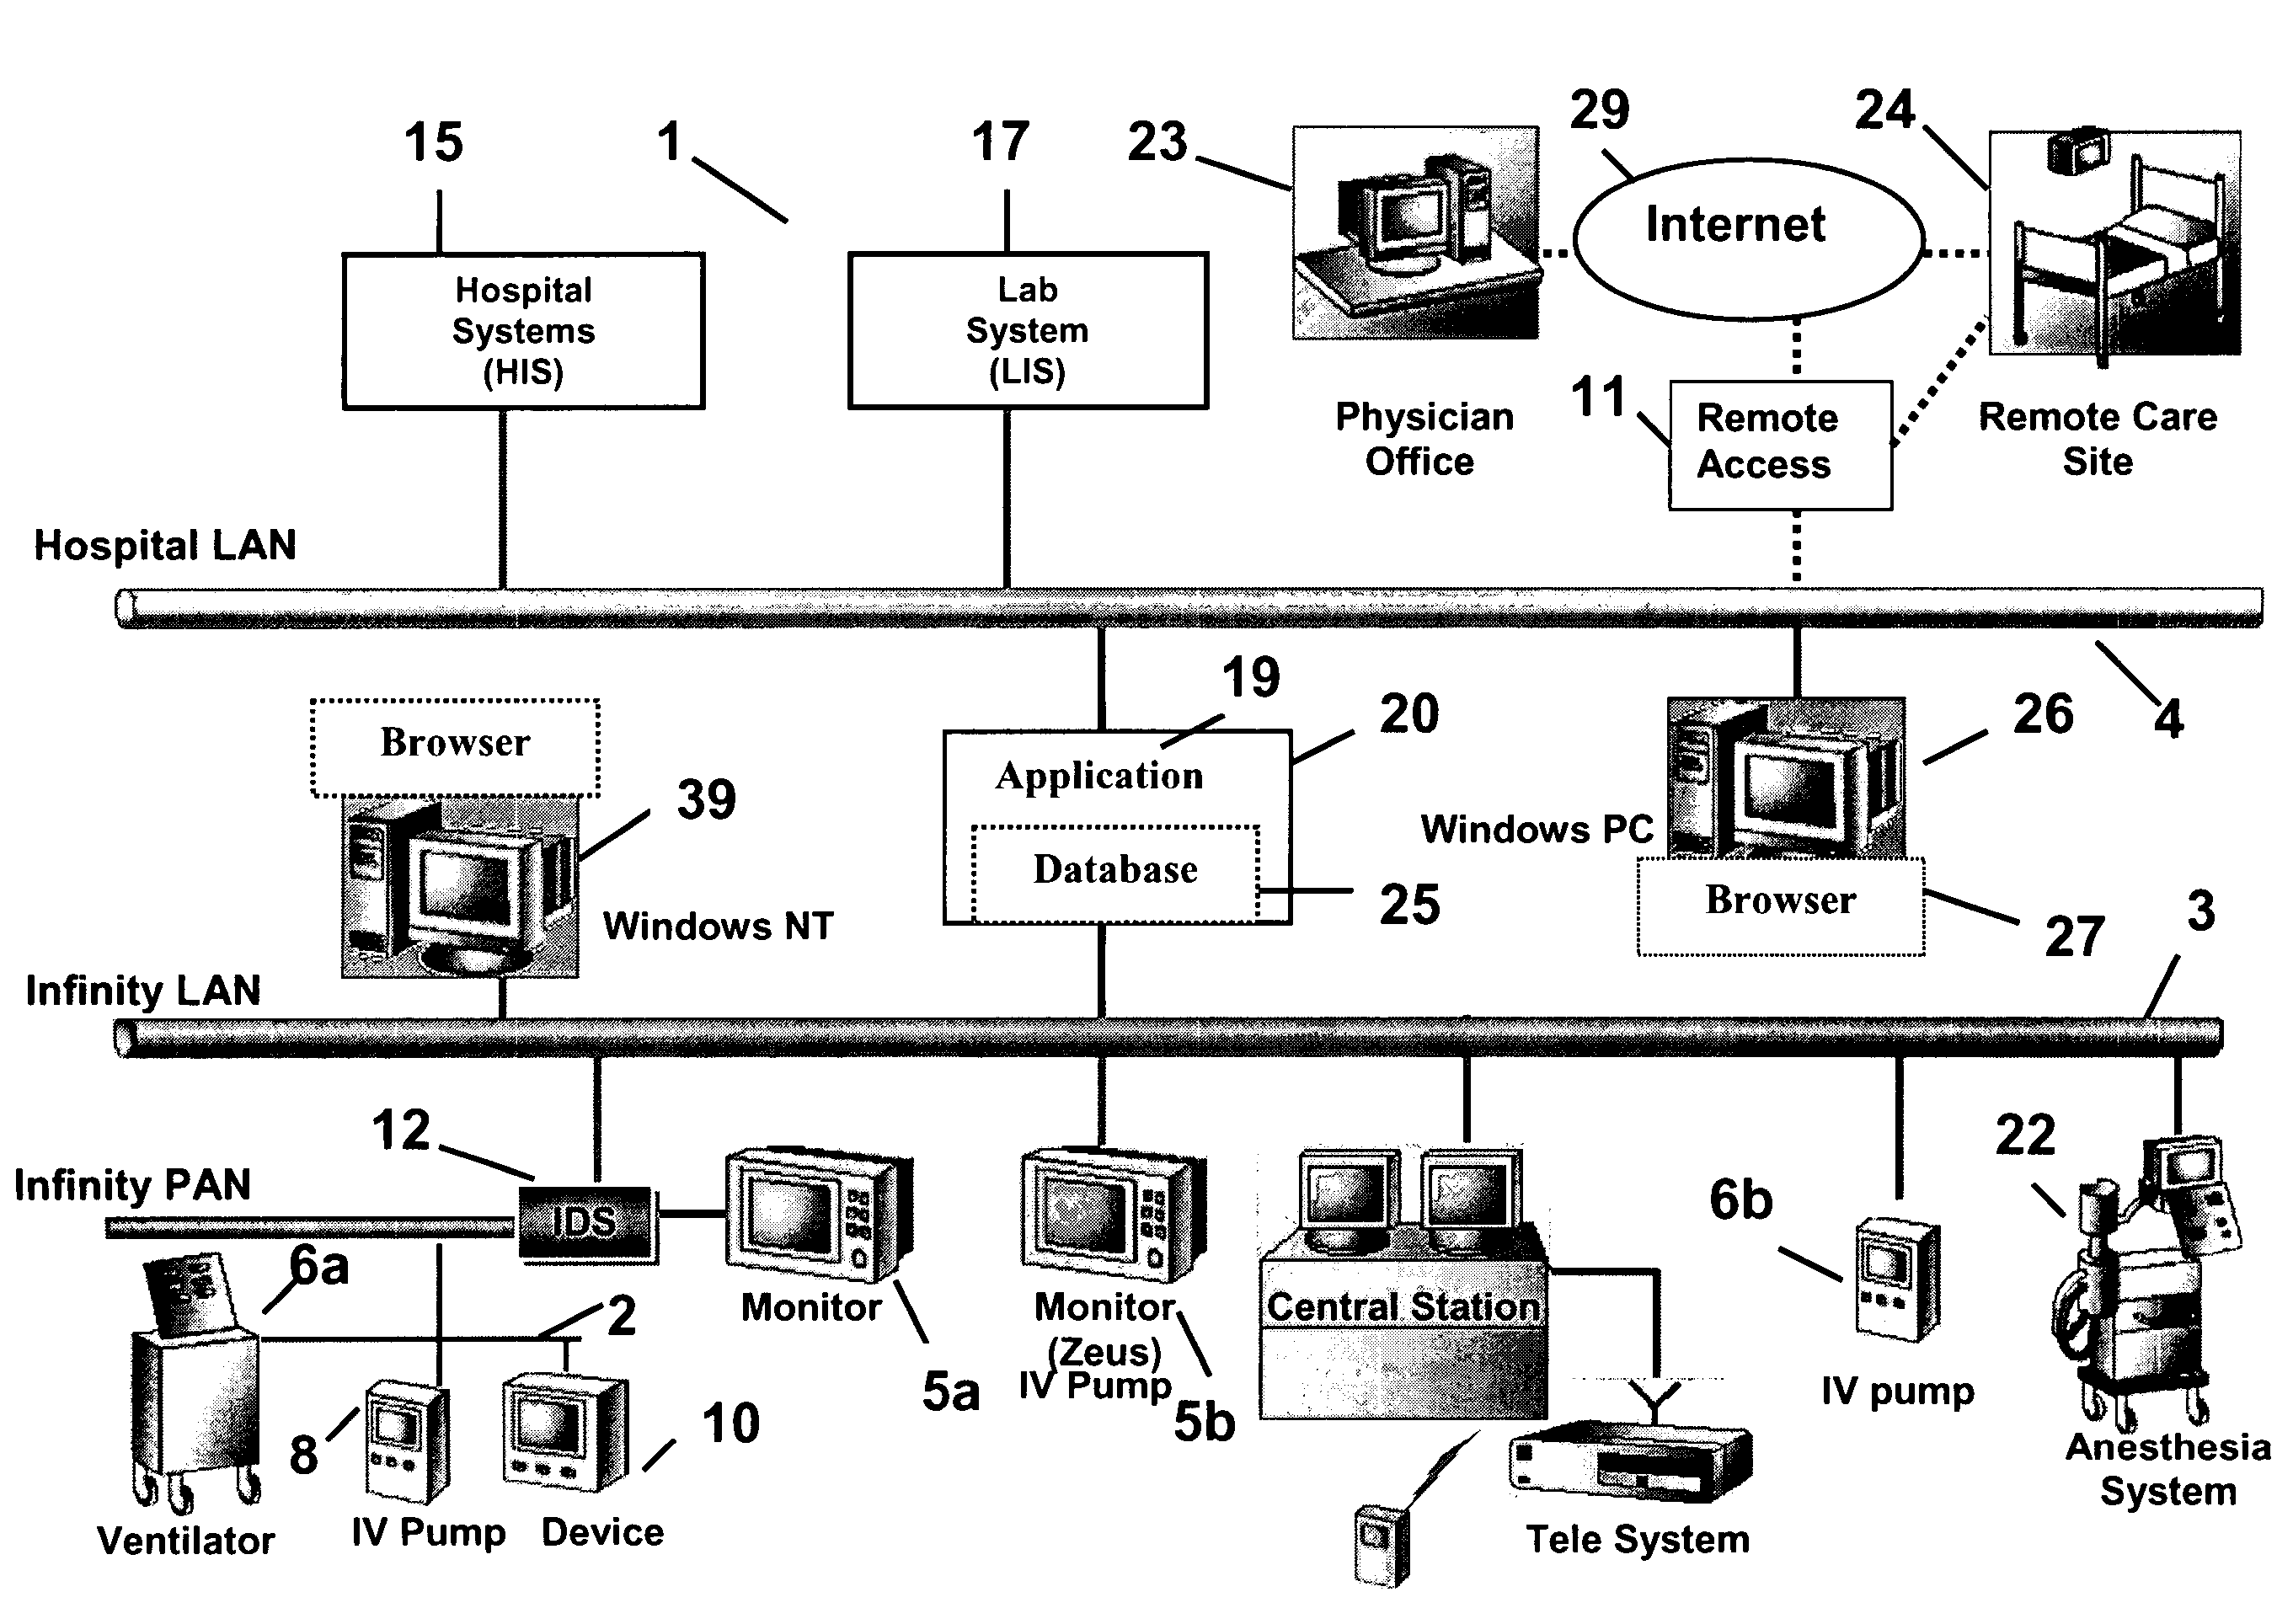 Healthcare system supporting multiple network connected fluid administration pumps